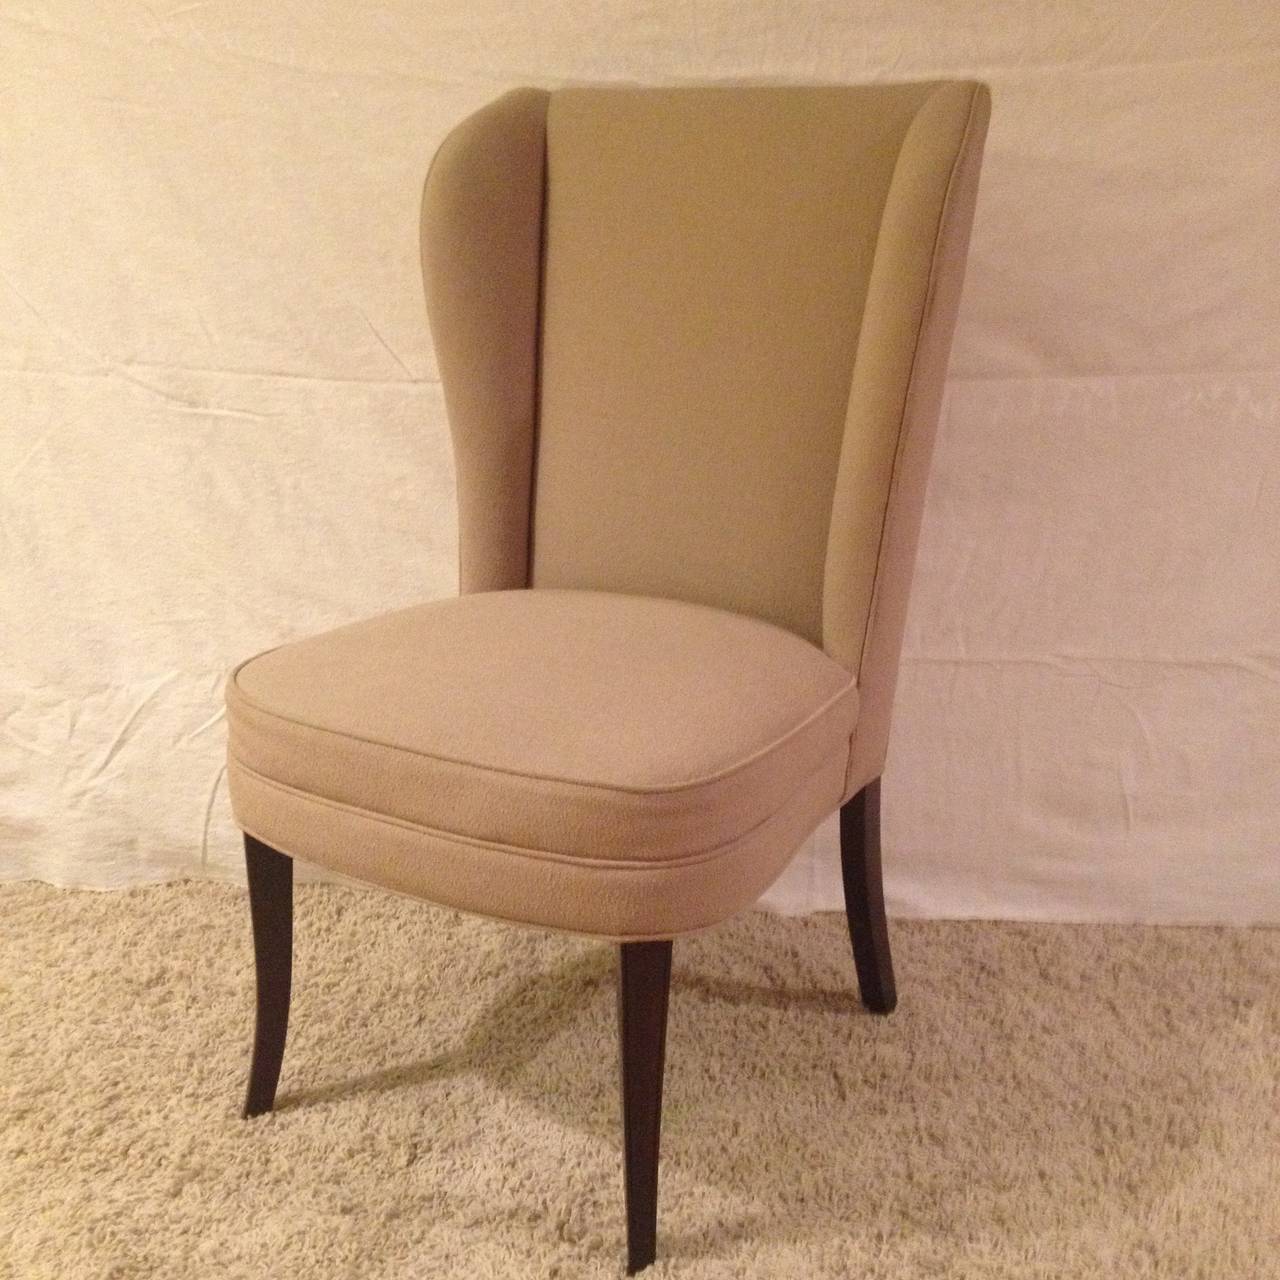 Pair of Parzinger style tall back chairs, with a beige nub fabric and with mahogany legs.